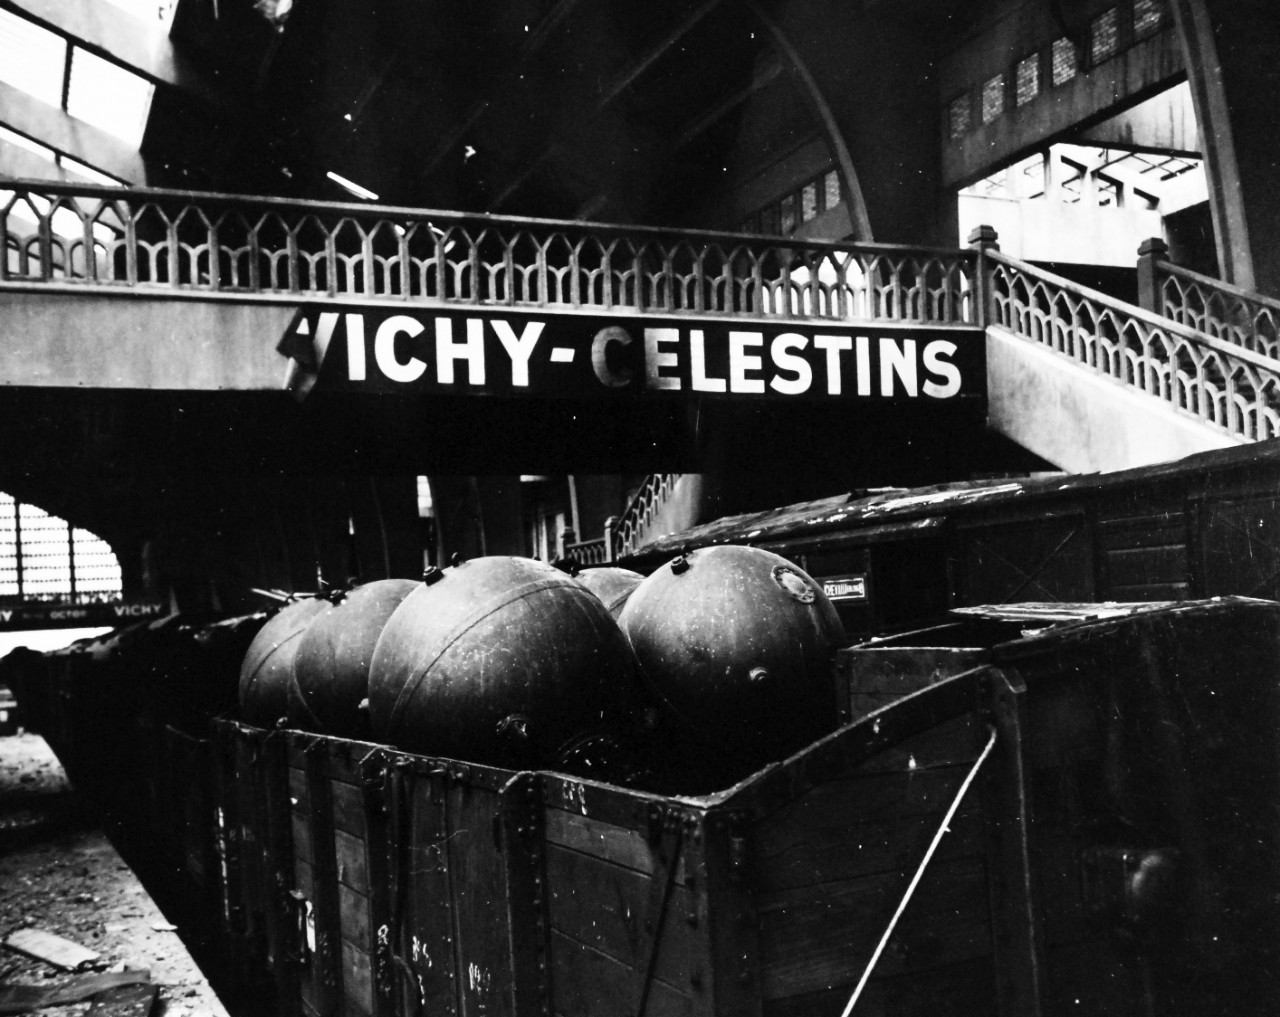 80-G-255944:   Normandy Invasion, Cherbourg, France, July 1944.    Carload of German mines salvaged by U.S. and British mine disposal men in railroad station at Cherbourg, France.  Note the Vichy-Celestins sign.  Photograph received October 28, 1944.  Official U.S. Navy Photograph, now in the collections of the National Archives.   (2014/11/05). 